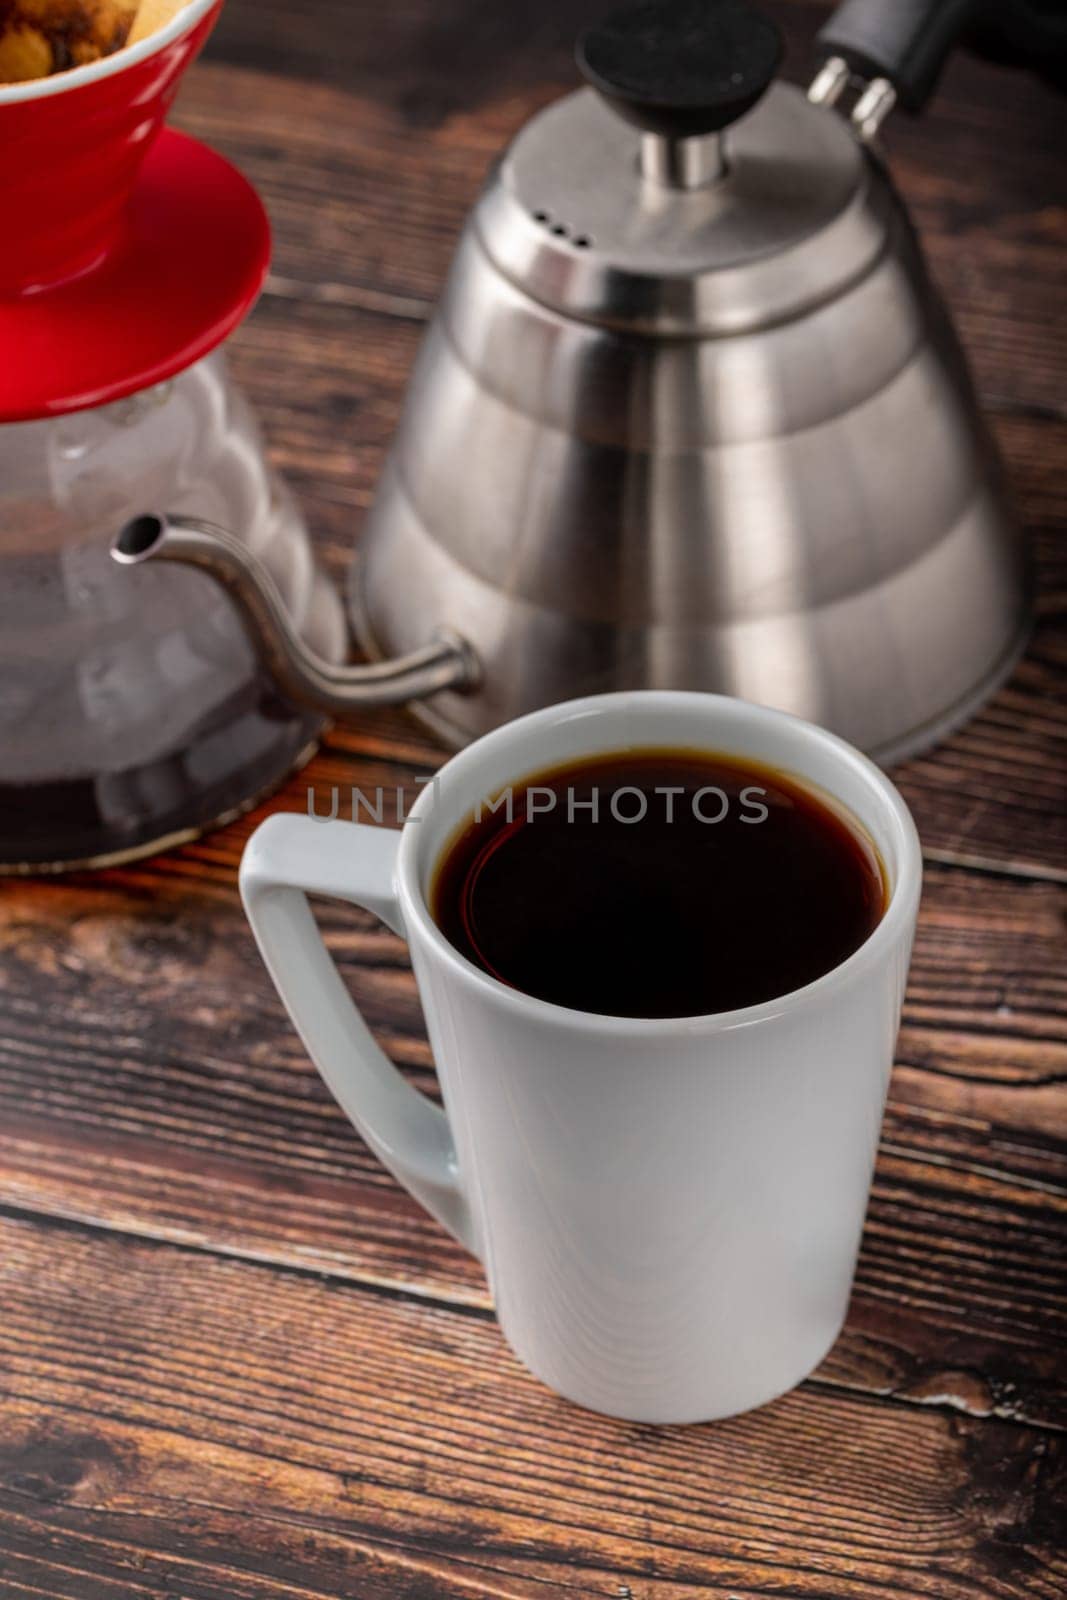 A cup of coffee and third generation pour over coffee brewing equipment on stone floor